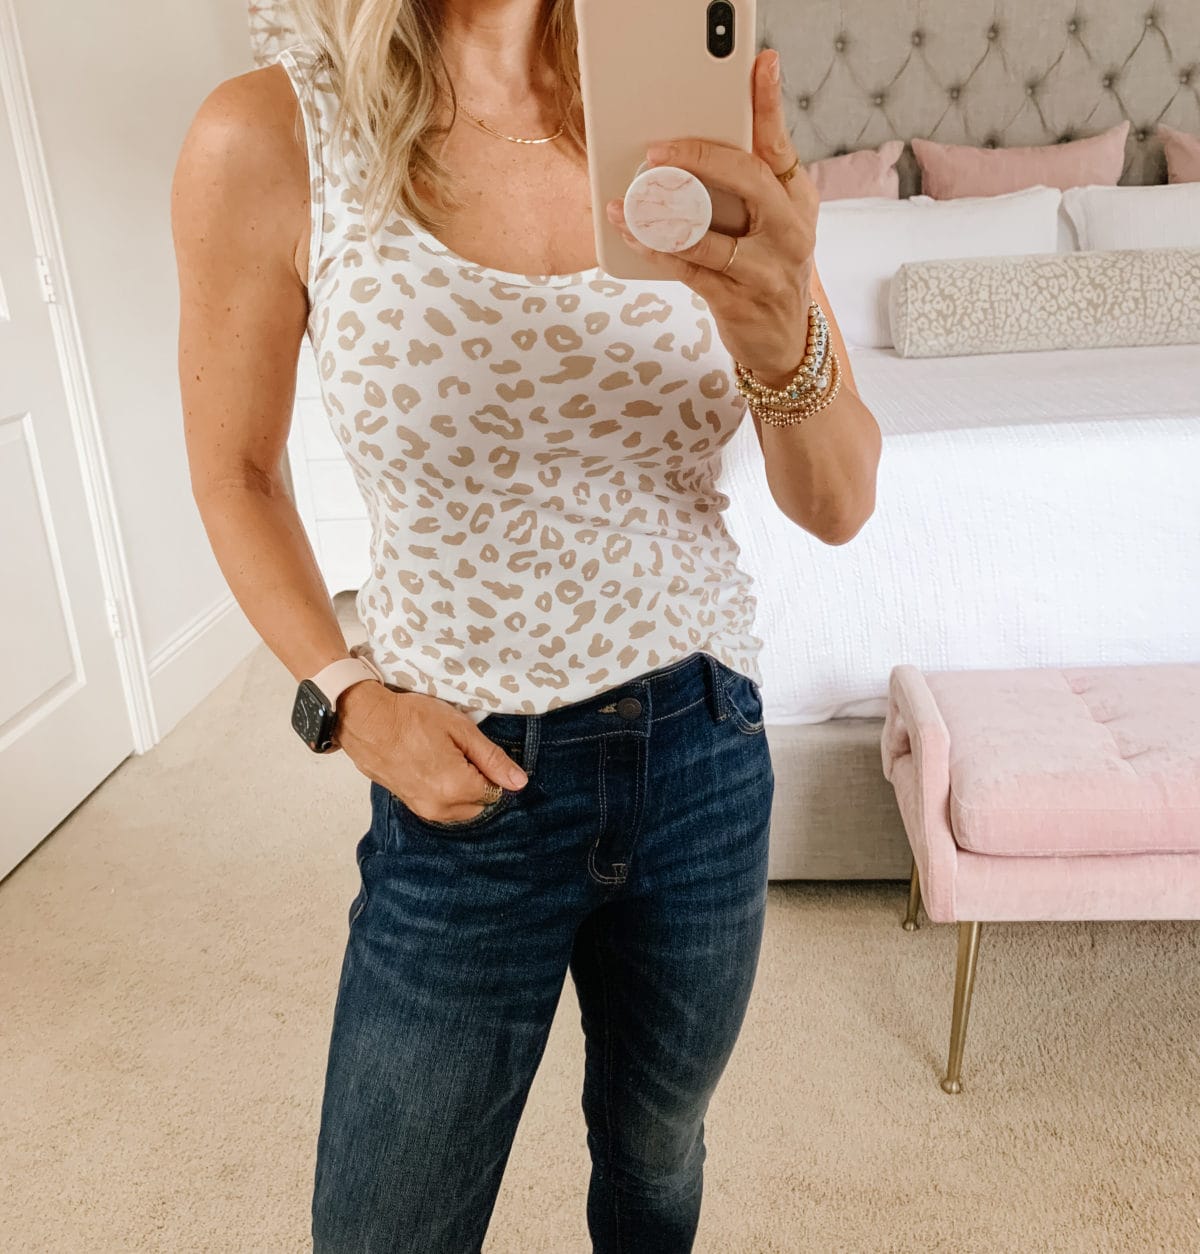 Old Navy Fashion, Leopard Tank, Studded Sandals, Jeans 